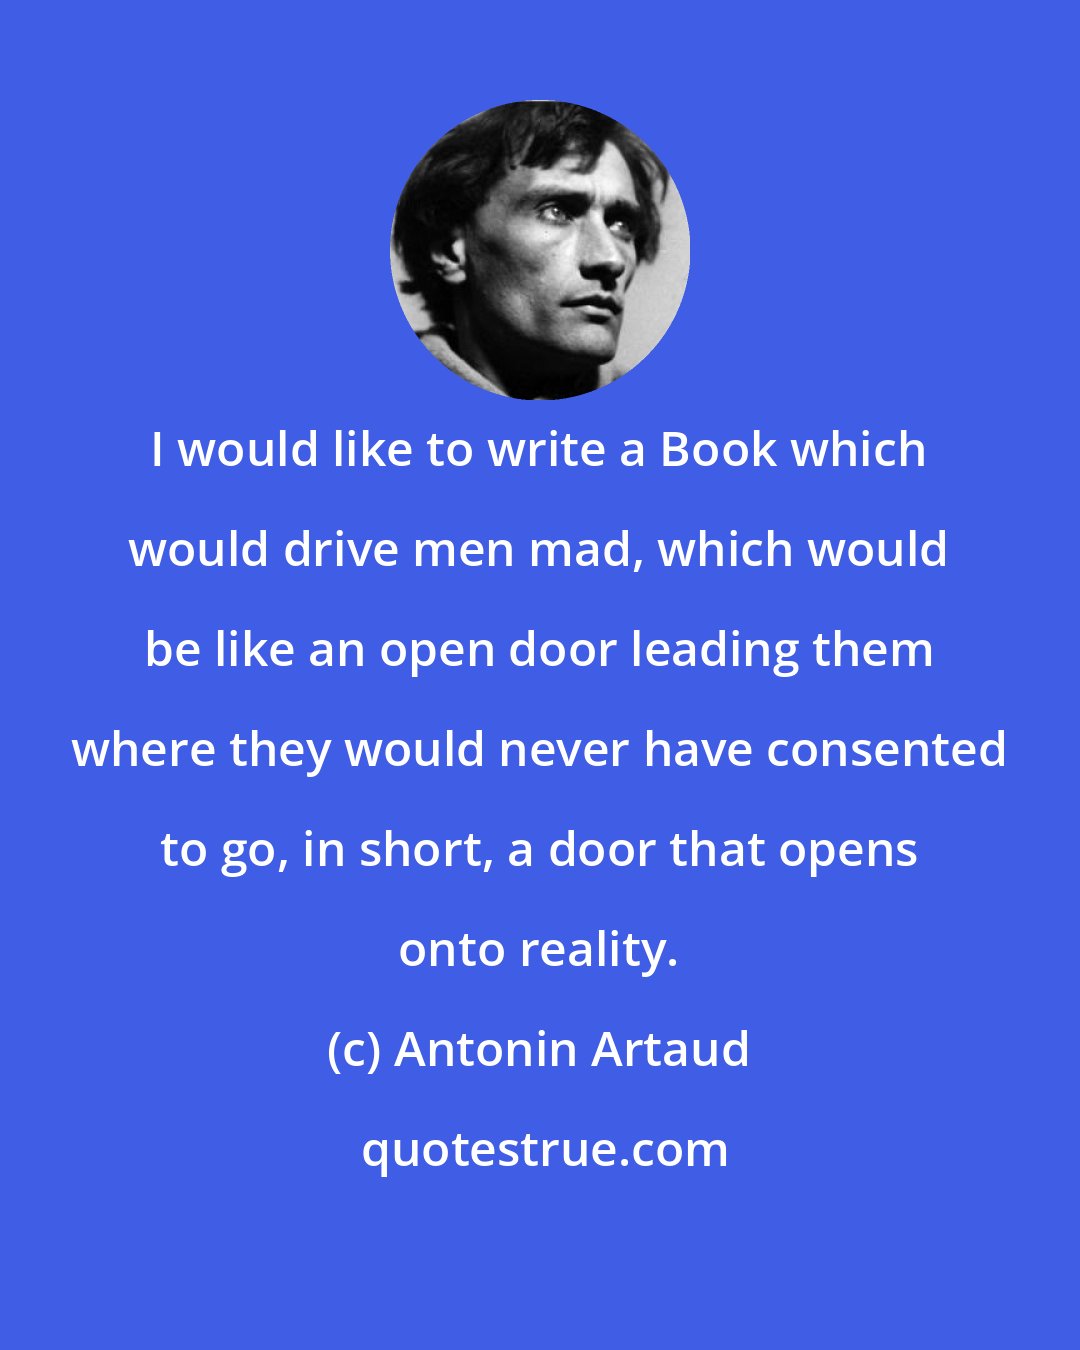 Antonin Artaud: I would like to write a Book which would drive men mad, which would be like an open door leading them where they would never have consented to go, in short, a door that opens onto reality.